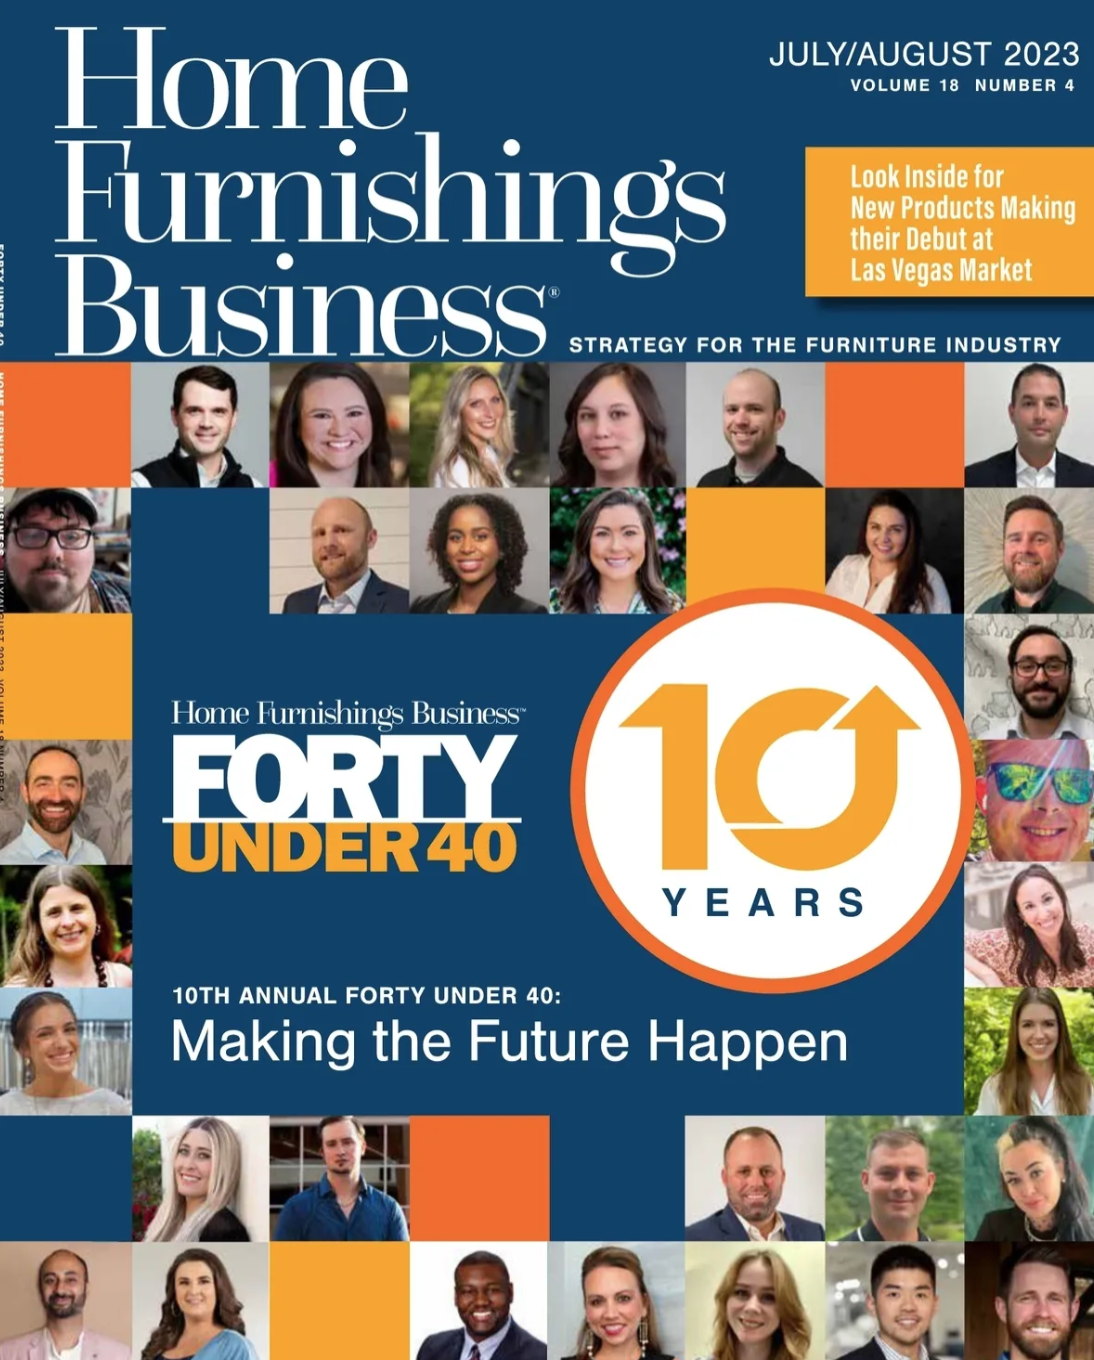 Home Furnishings Business July/August 2023 Magazine